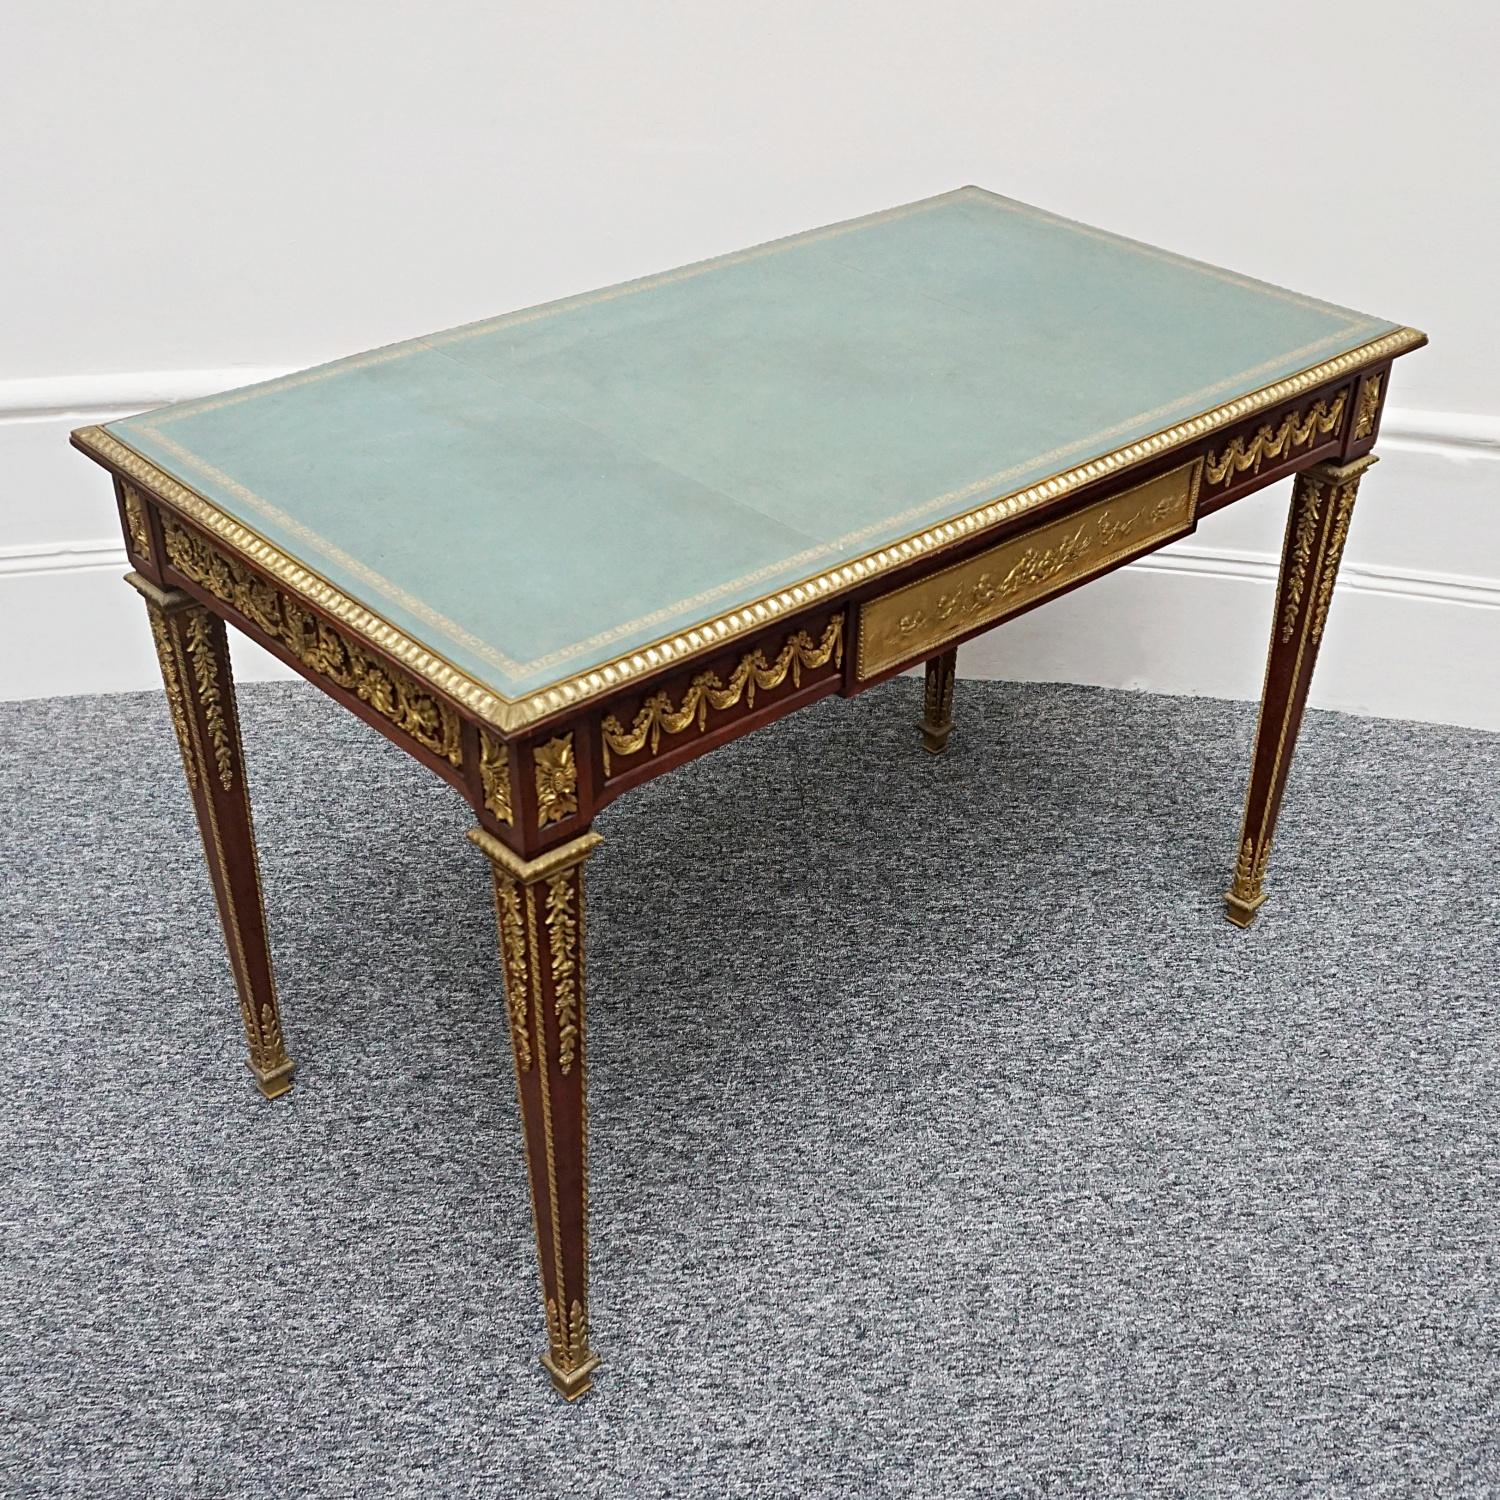 Louis XVI Style Gilt-Bronze Mounted Kingwood Writing Table by Francois Linke For Sale 8